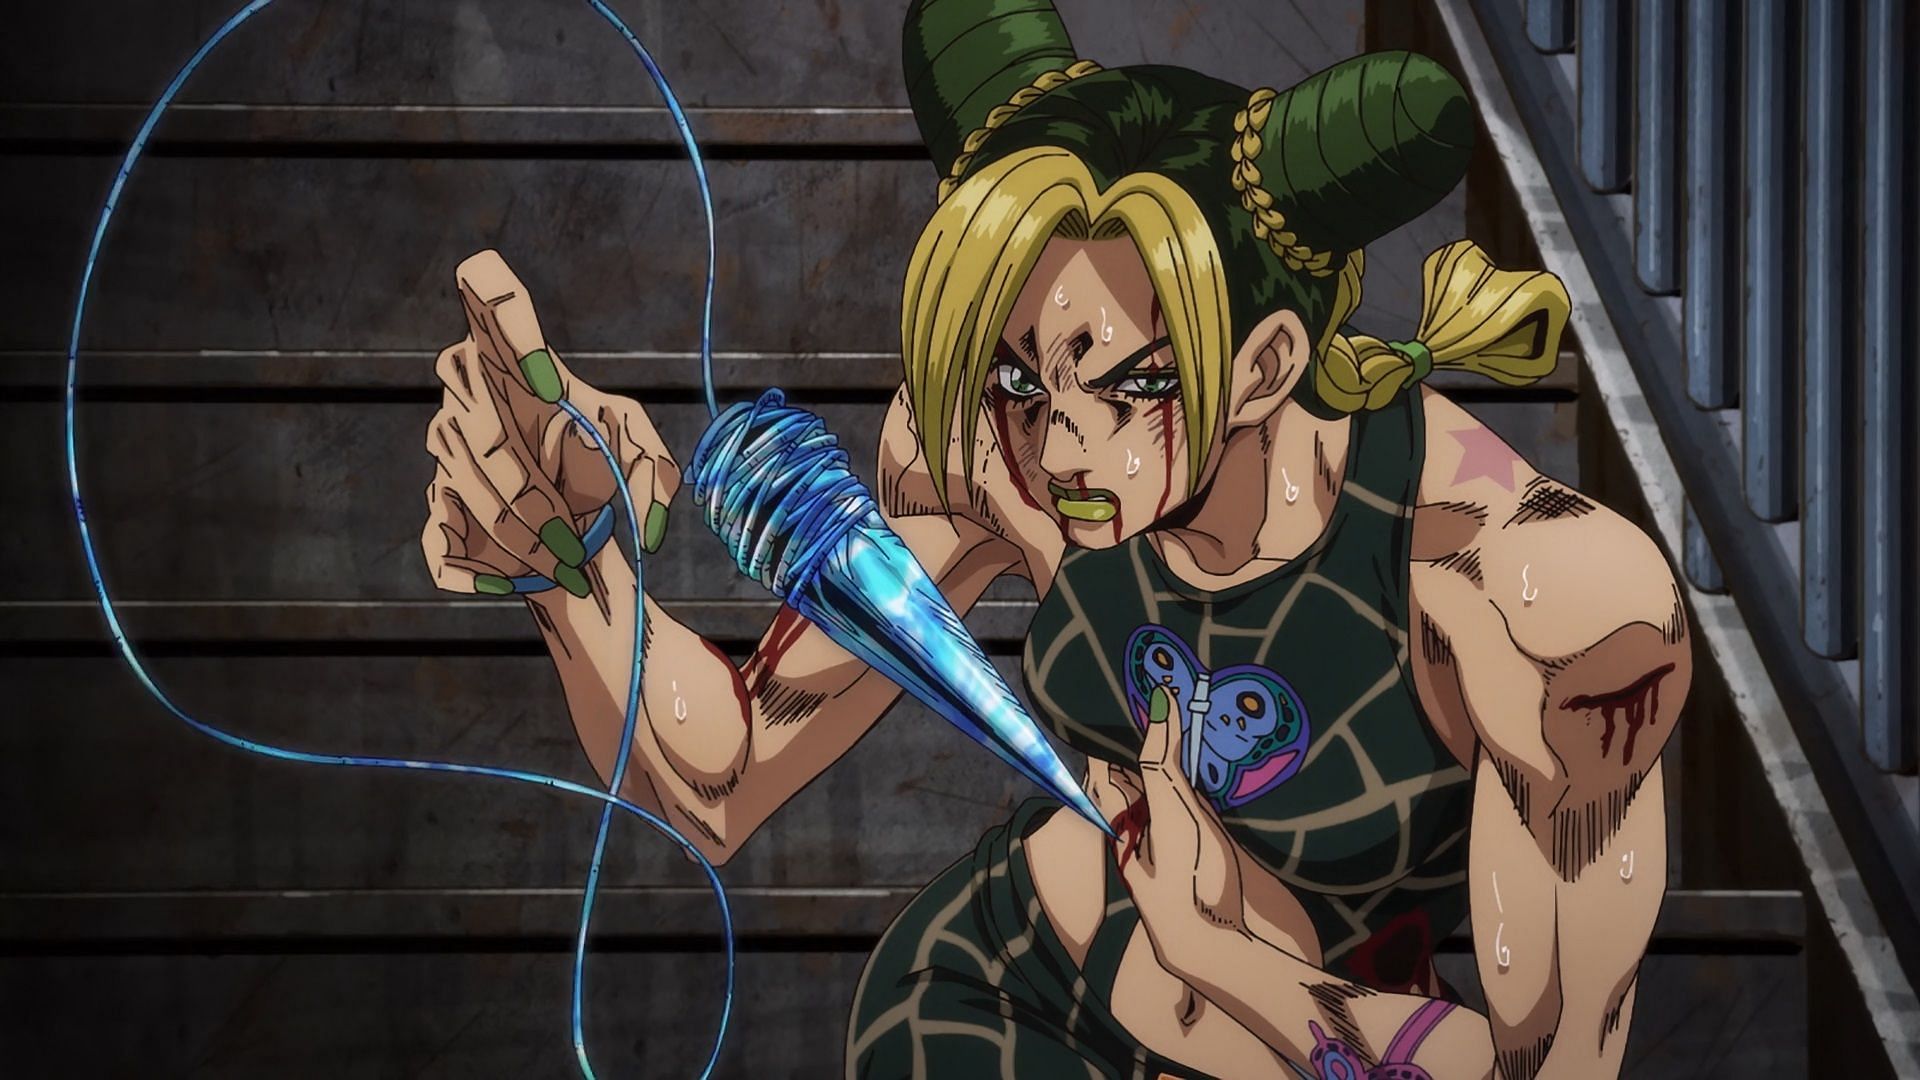 Jolyne as seen in the Stone Ocean anime (Image via David Productions)